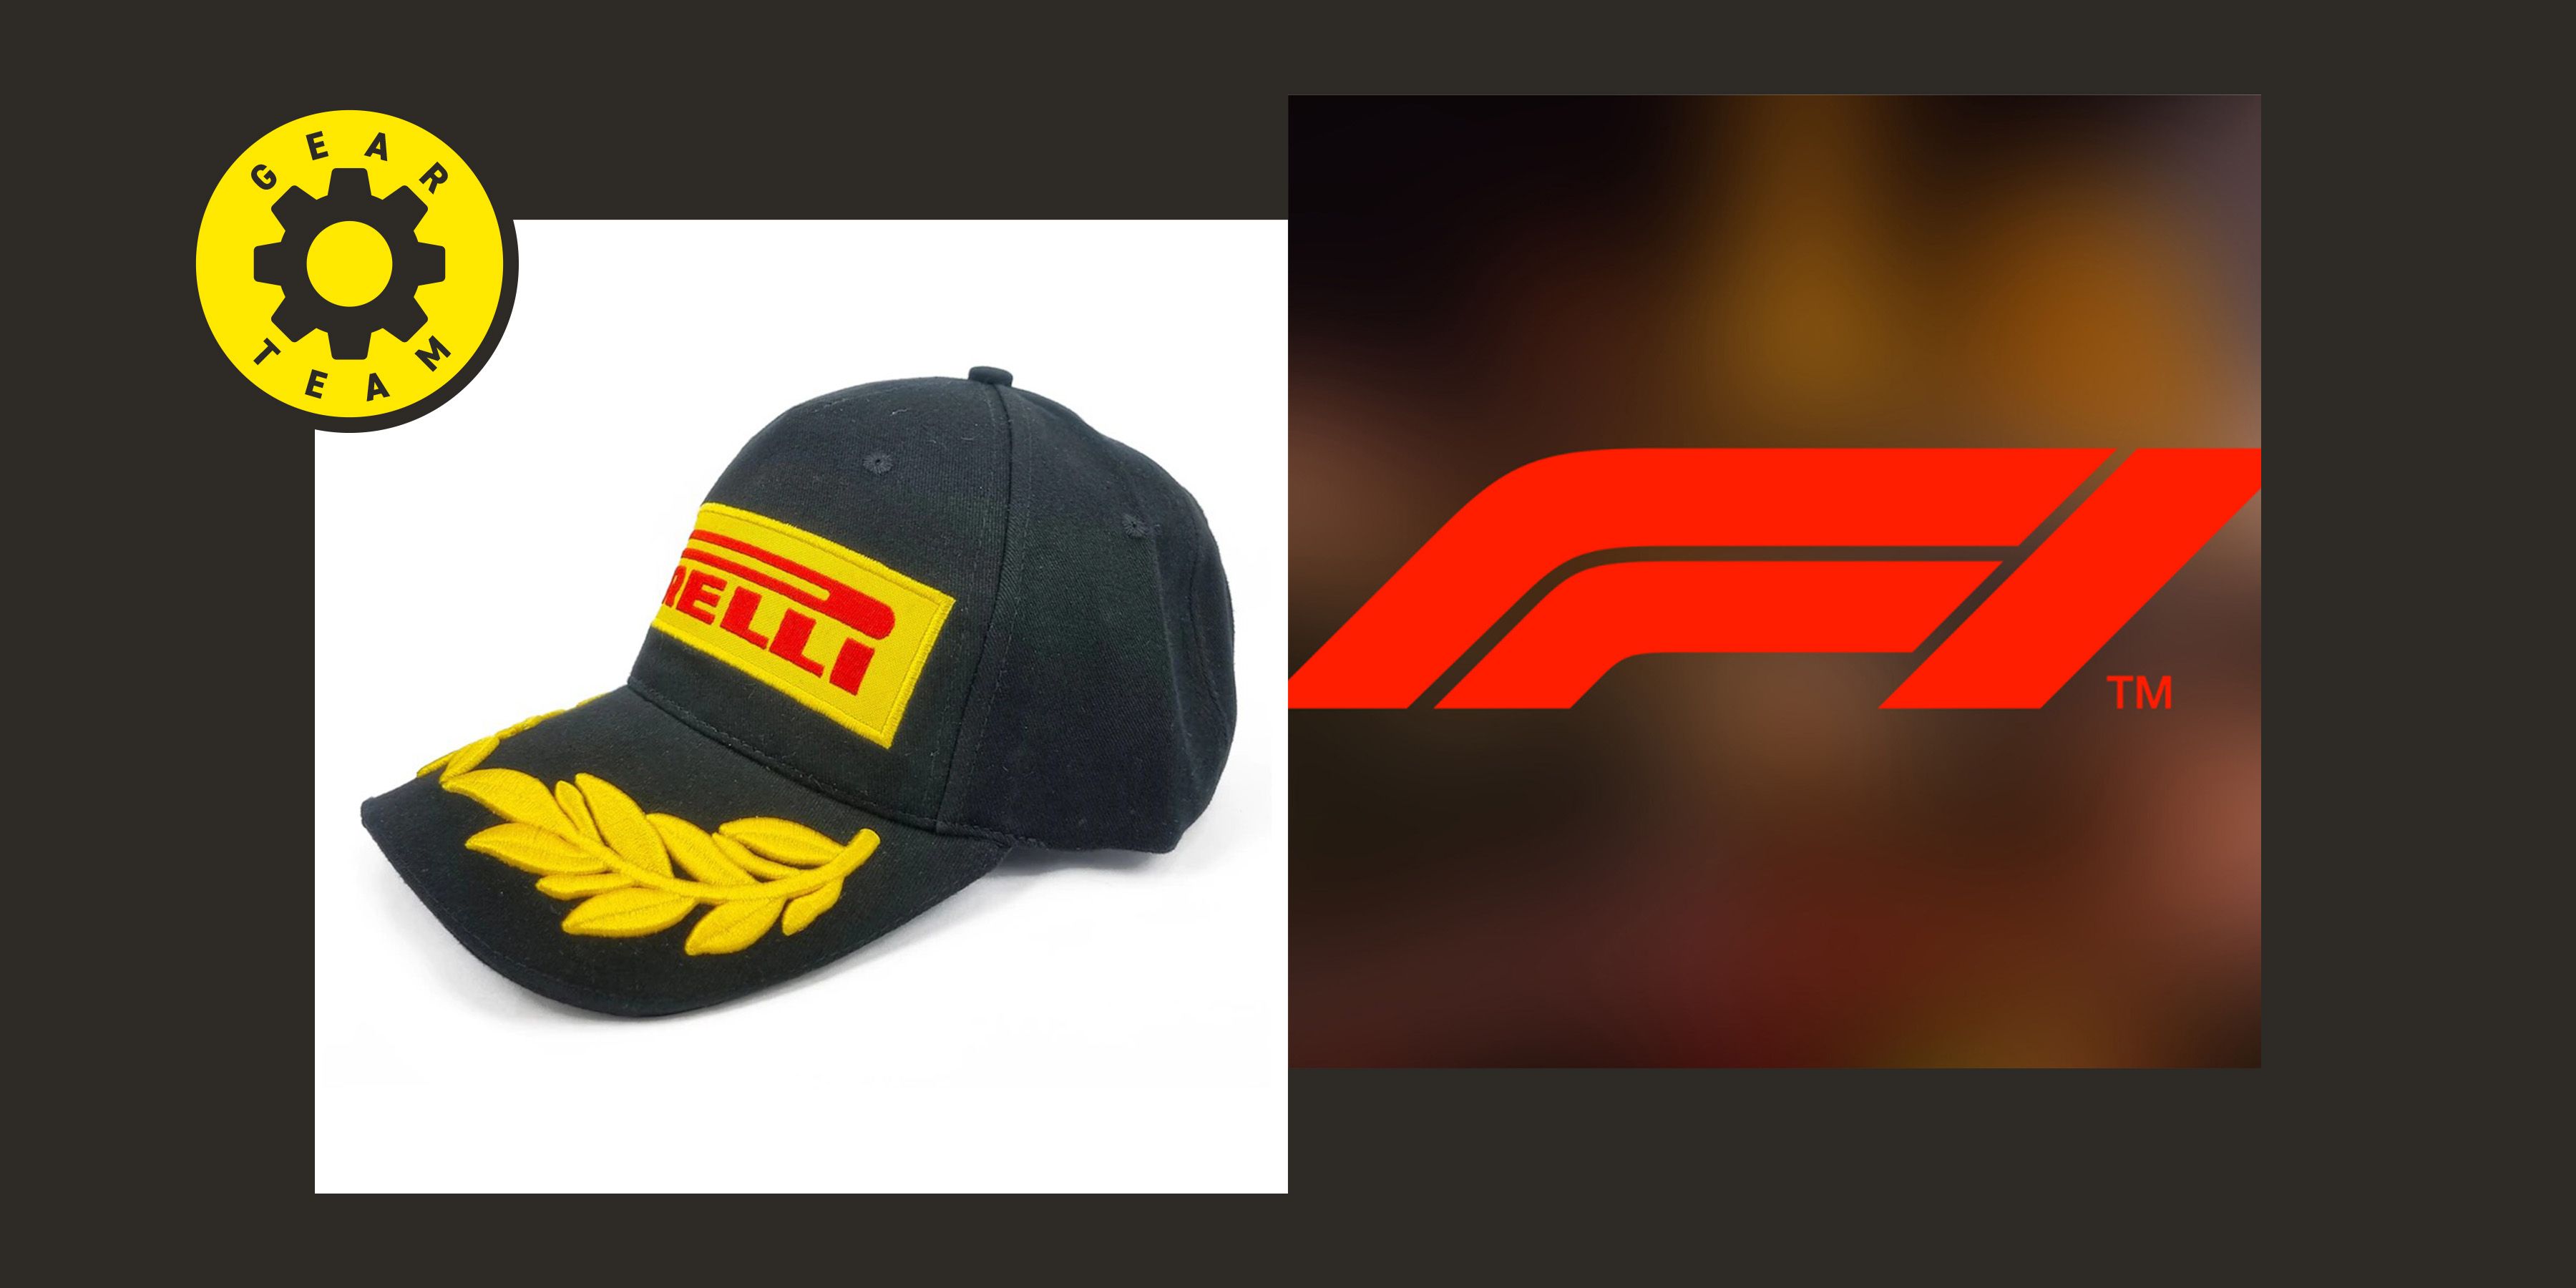 Kameel Leed Pracht Formula 1 Is Back! Start Your Engines with Official F1 Gear